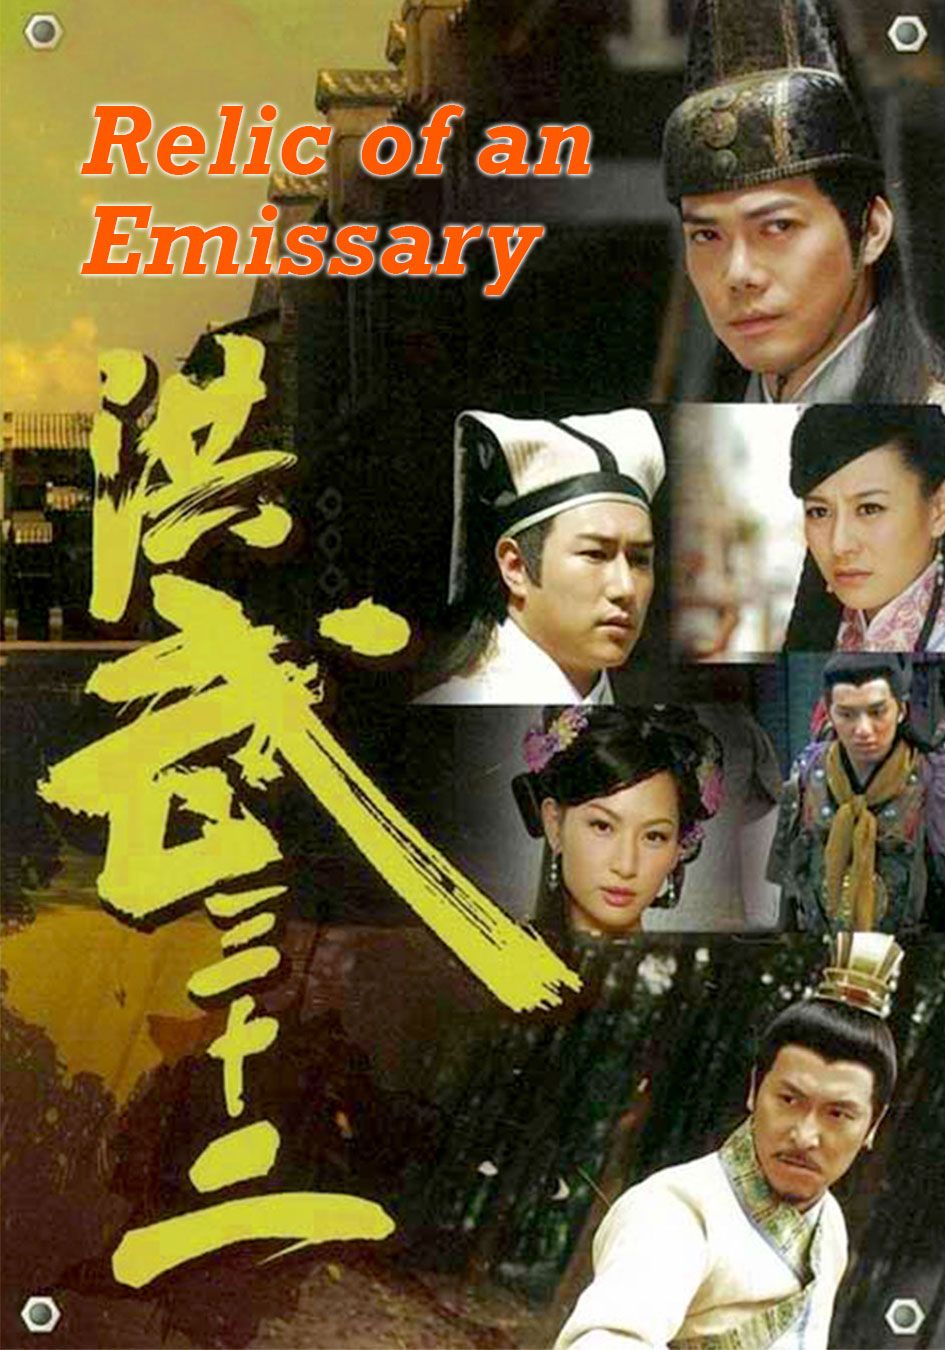 Relic of An Emissary-洪武三十二